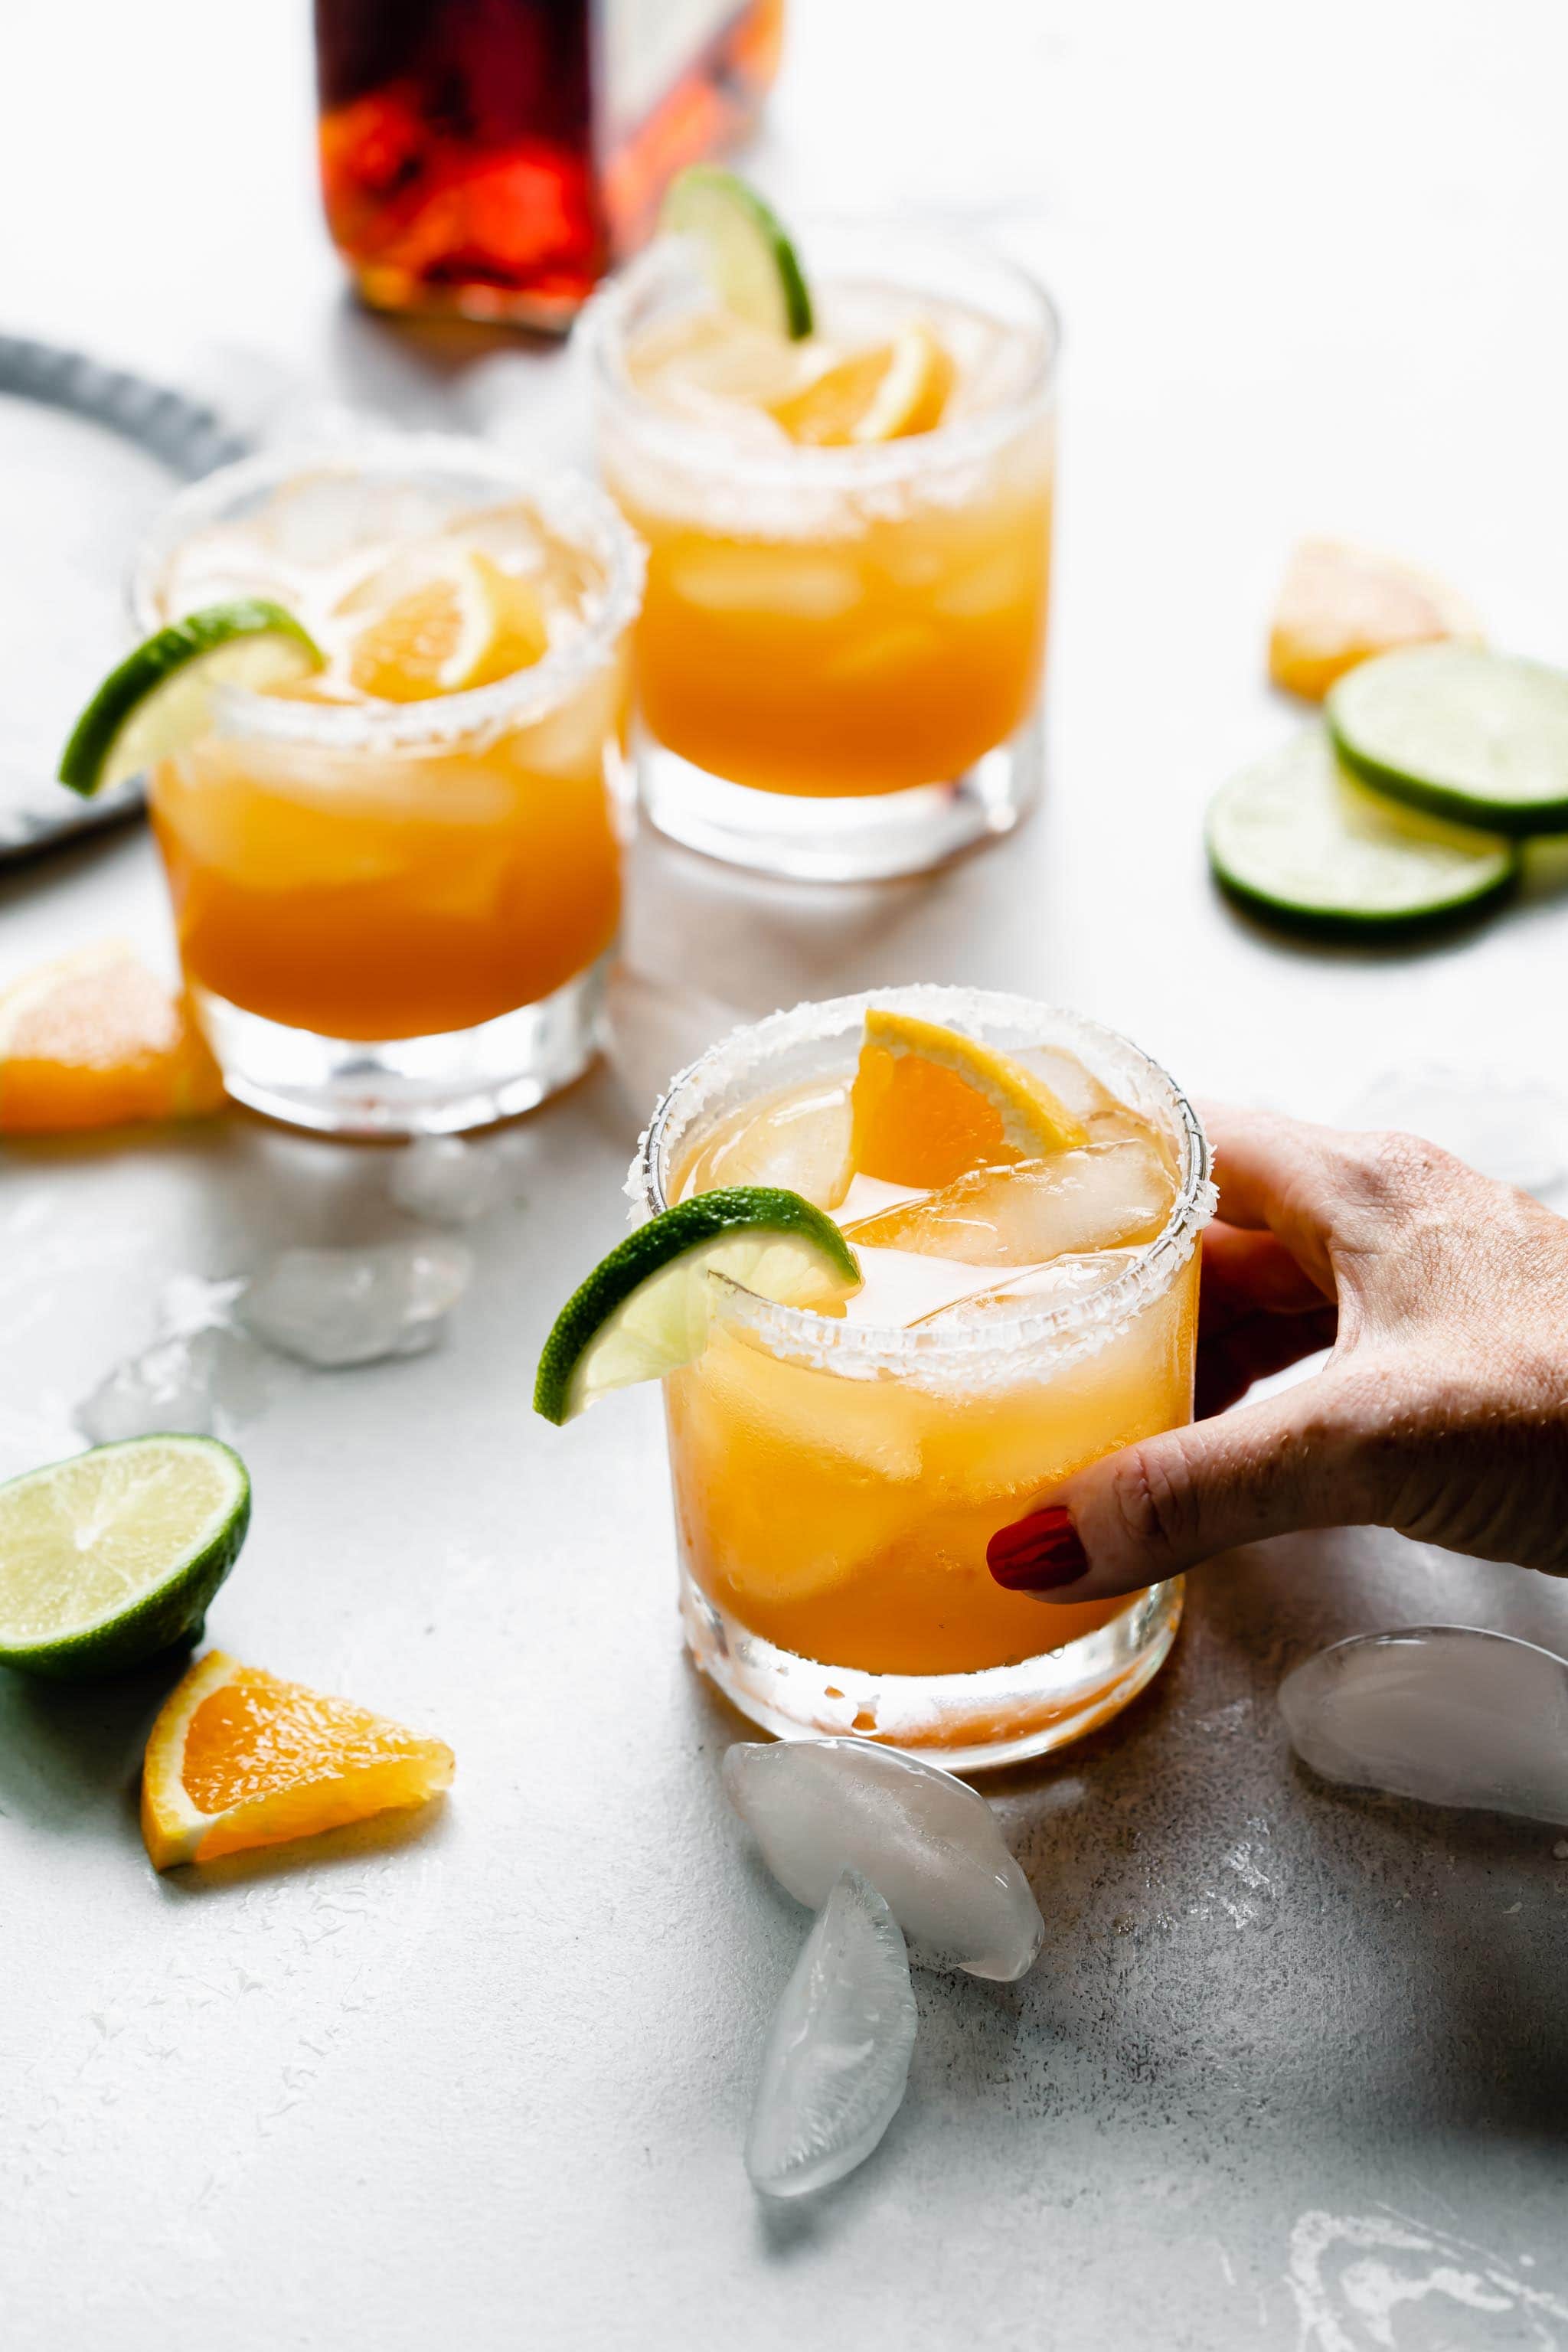 Hand holding glass of Italian Margarita rimmed with salt and garnished with orange and lime slices.